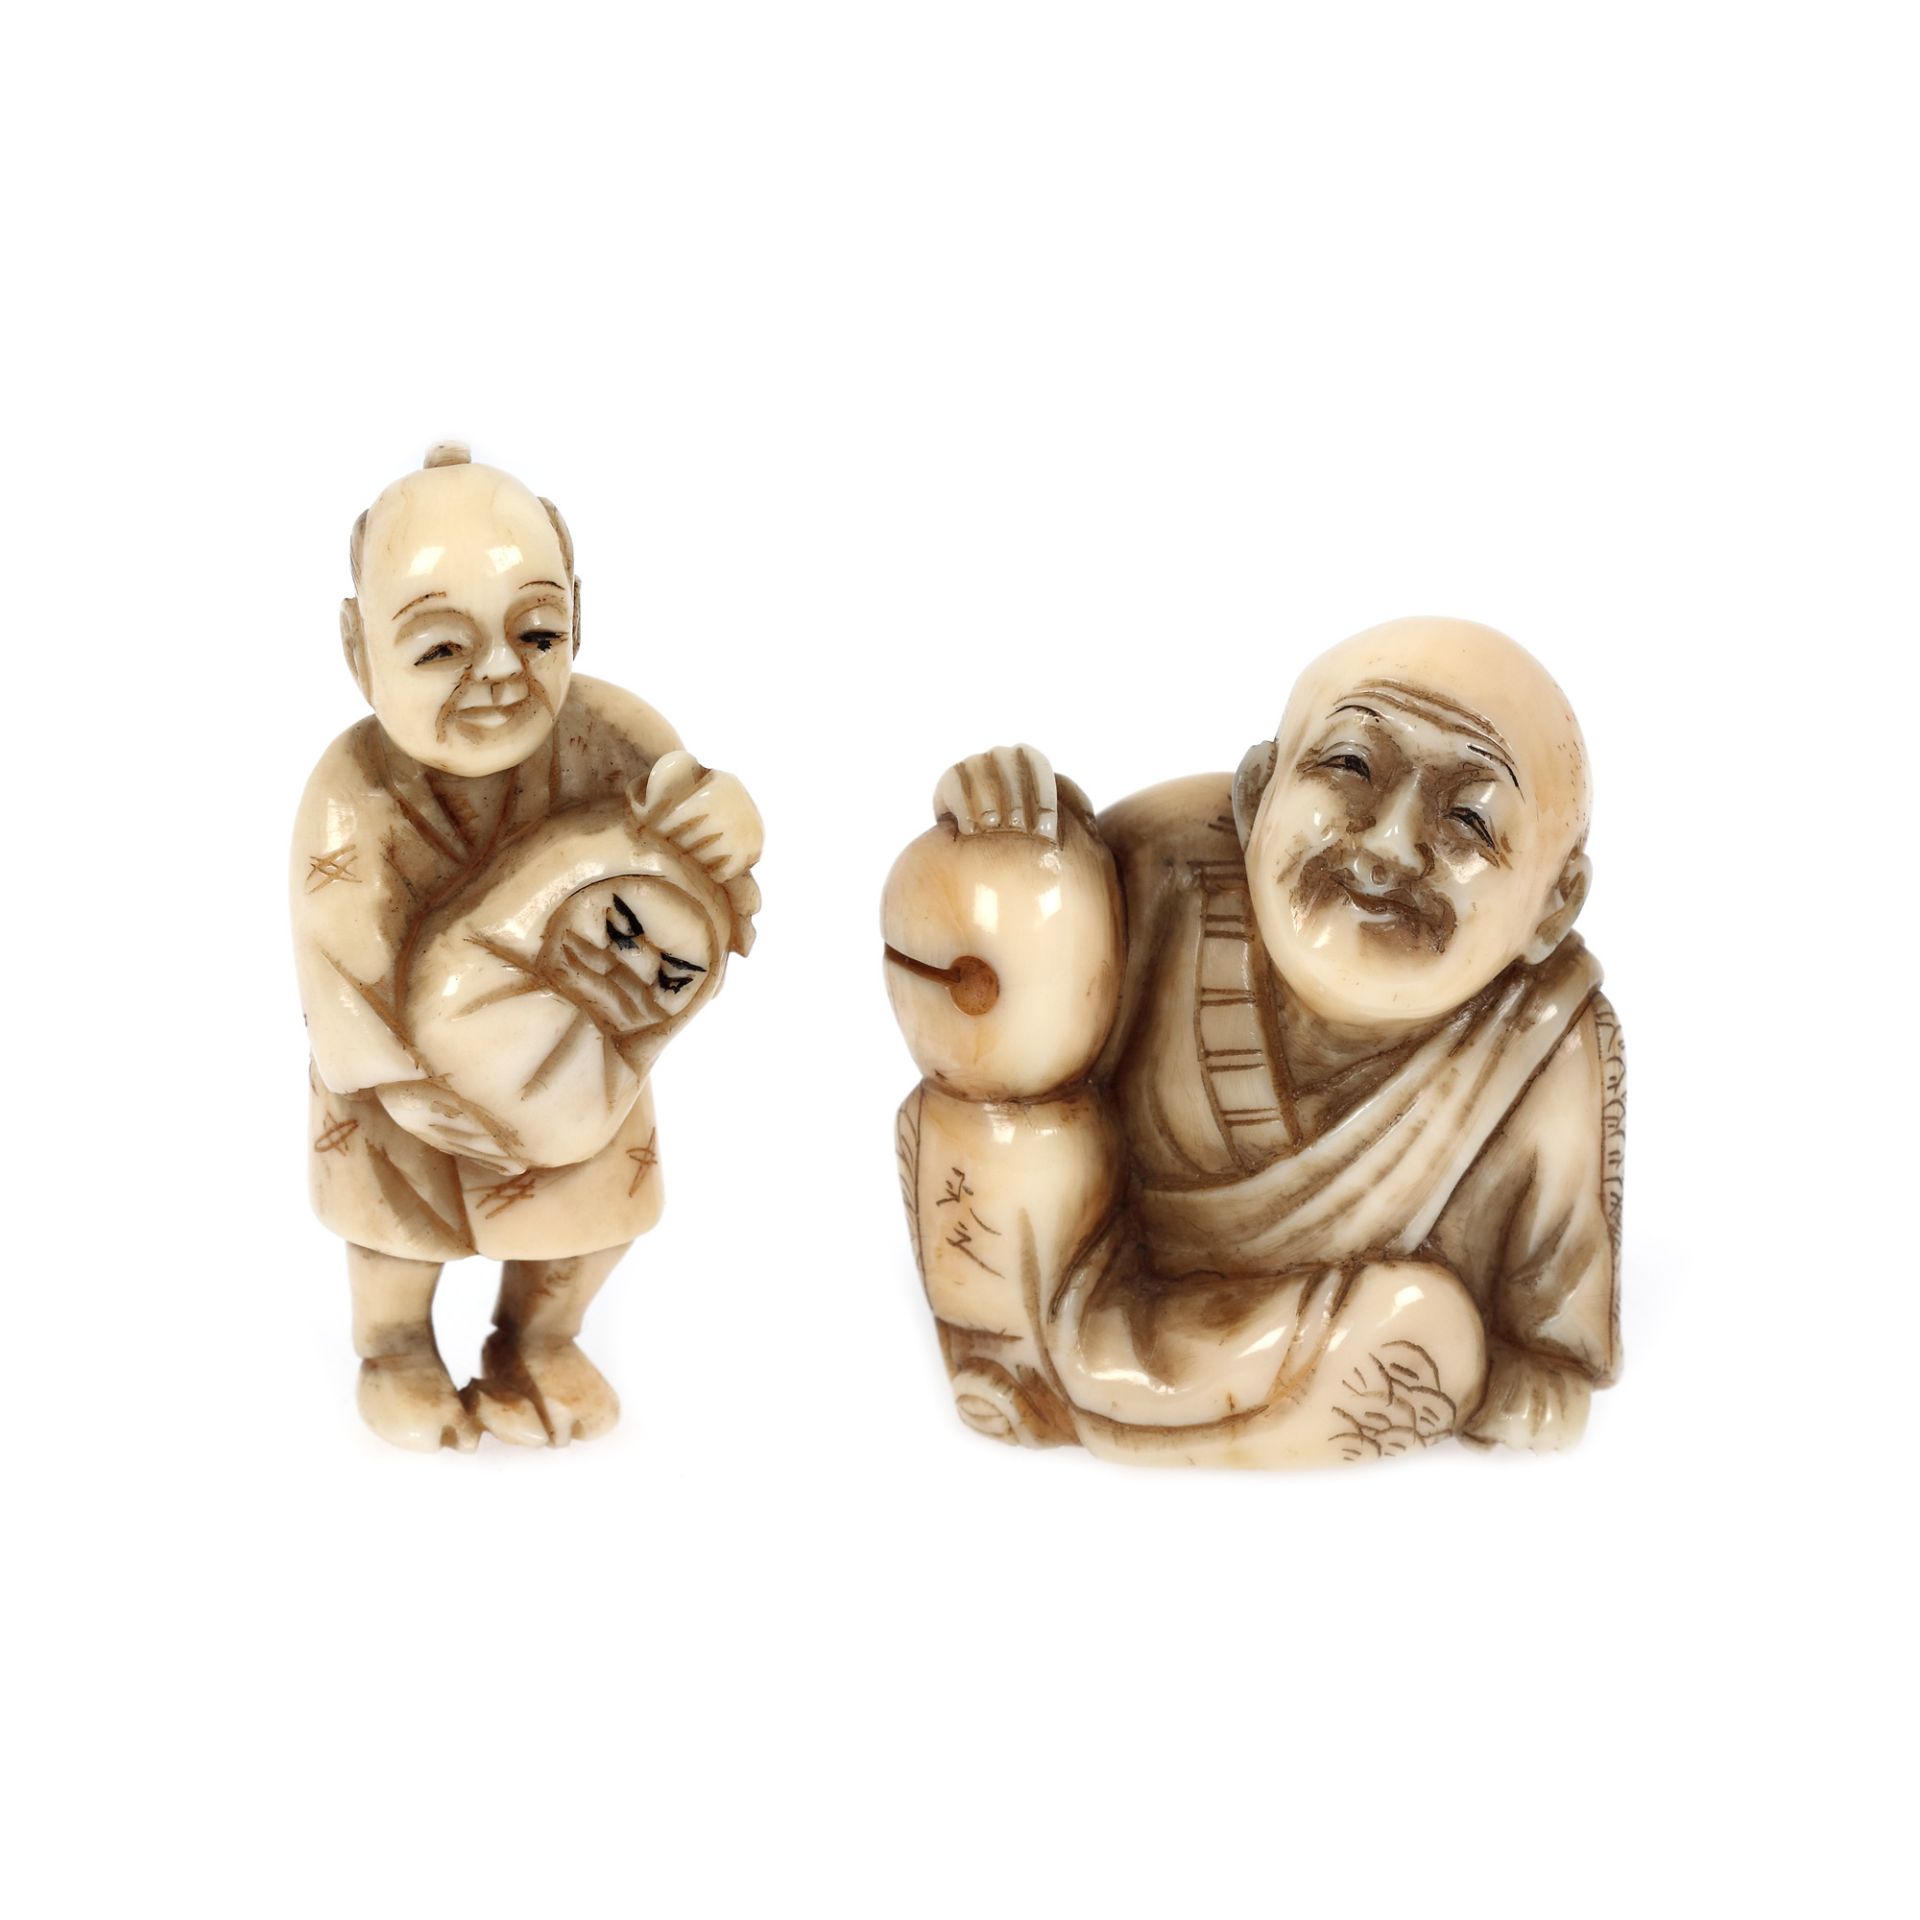 Pair of ivory netsuke, signed, depicting a seated old man and a parent with a child in their arms, J